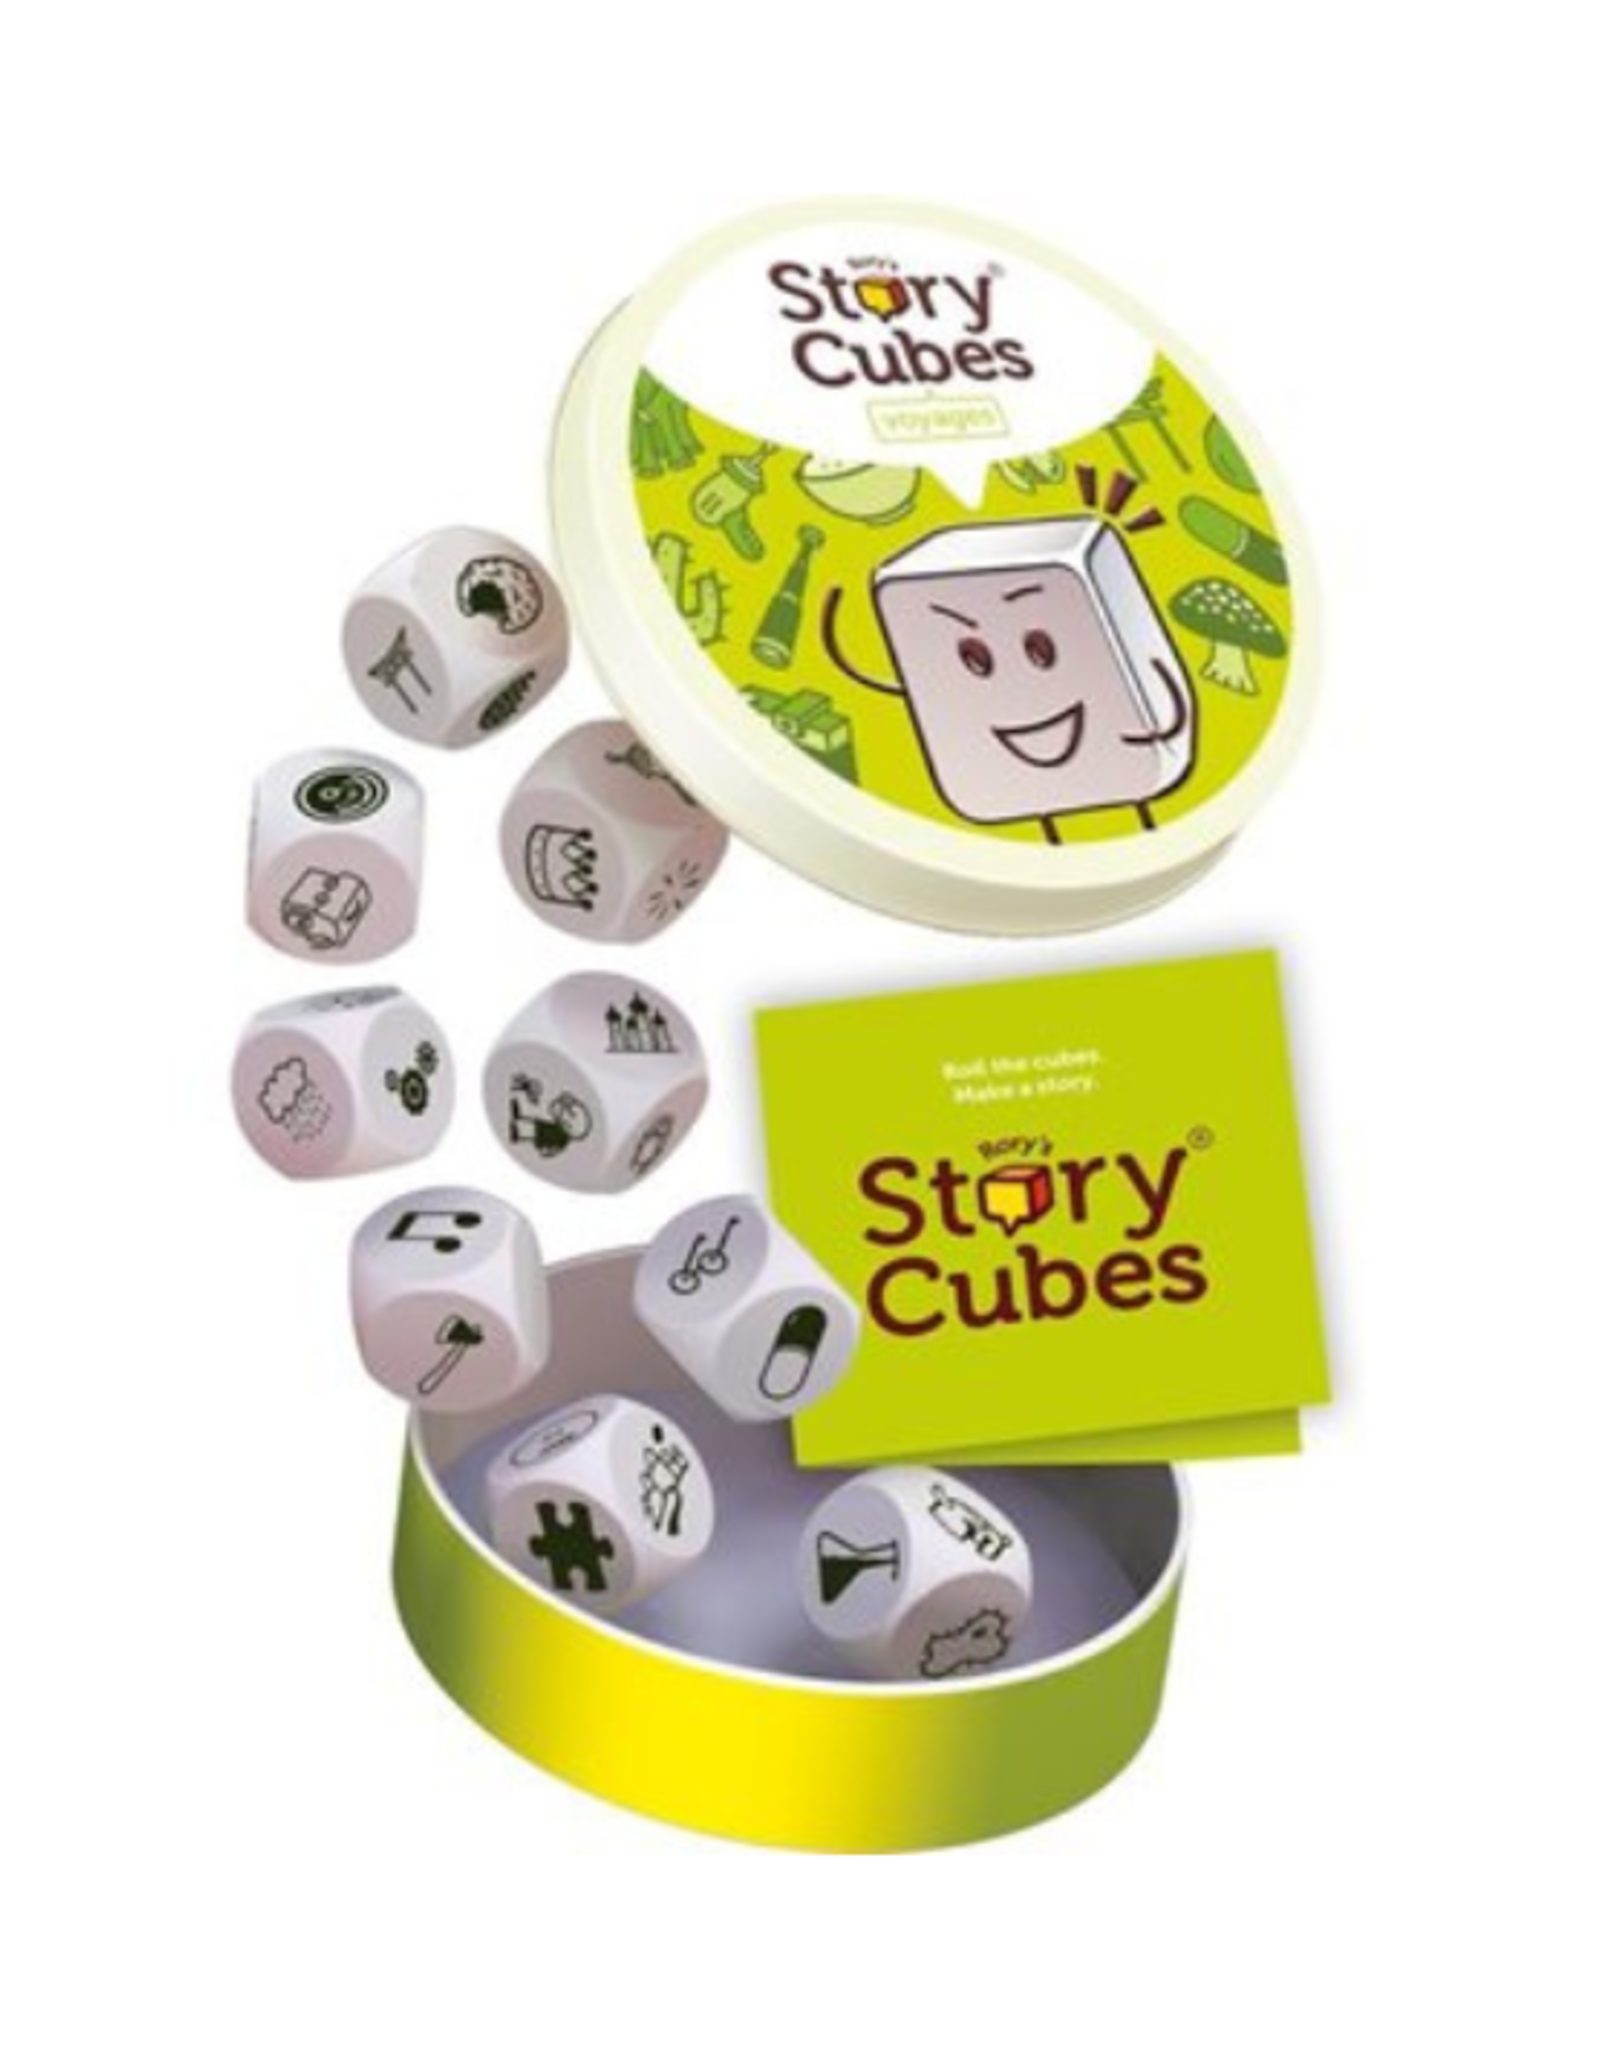 Zygo Matic Zygo Matic - Rory's Story Cubes Voyages